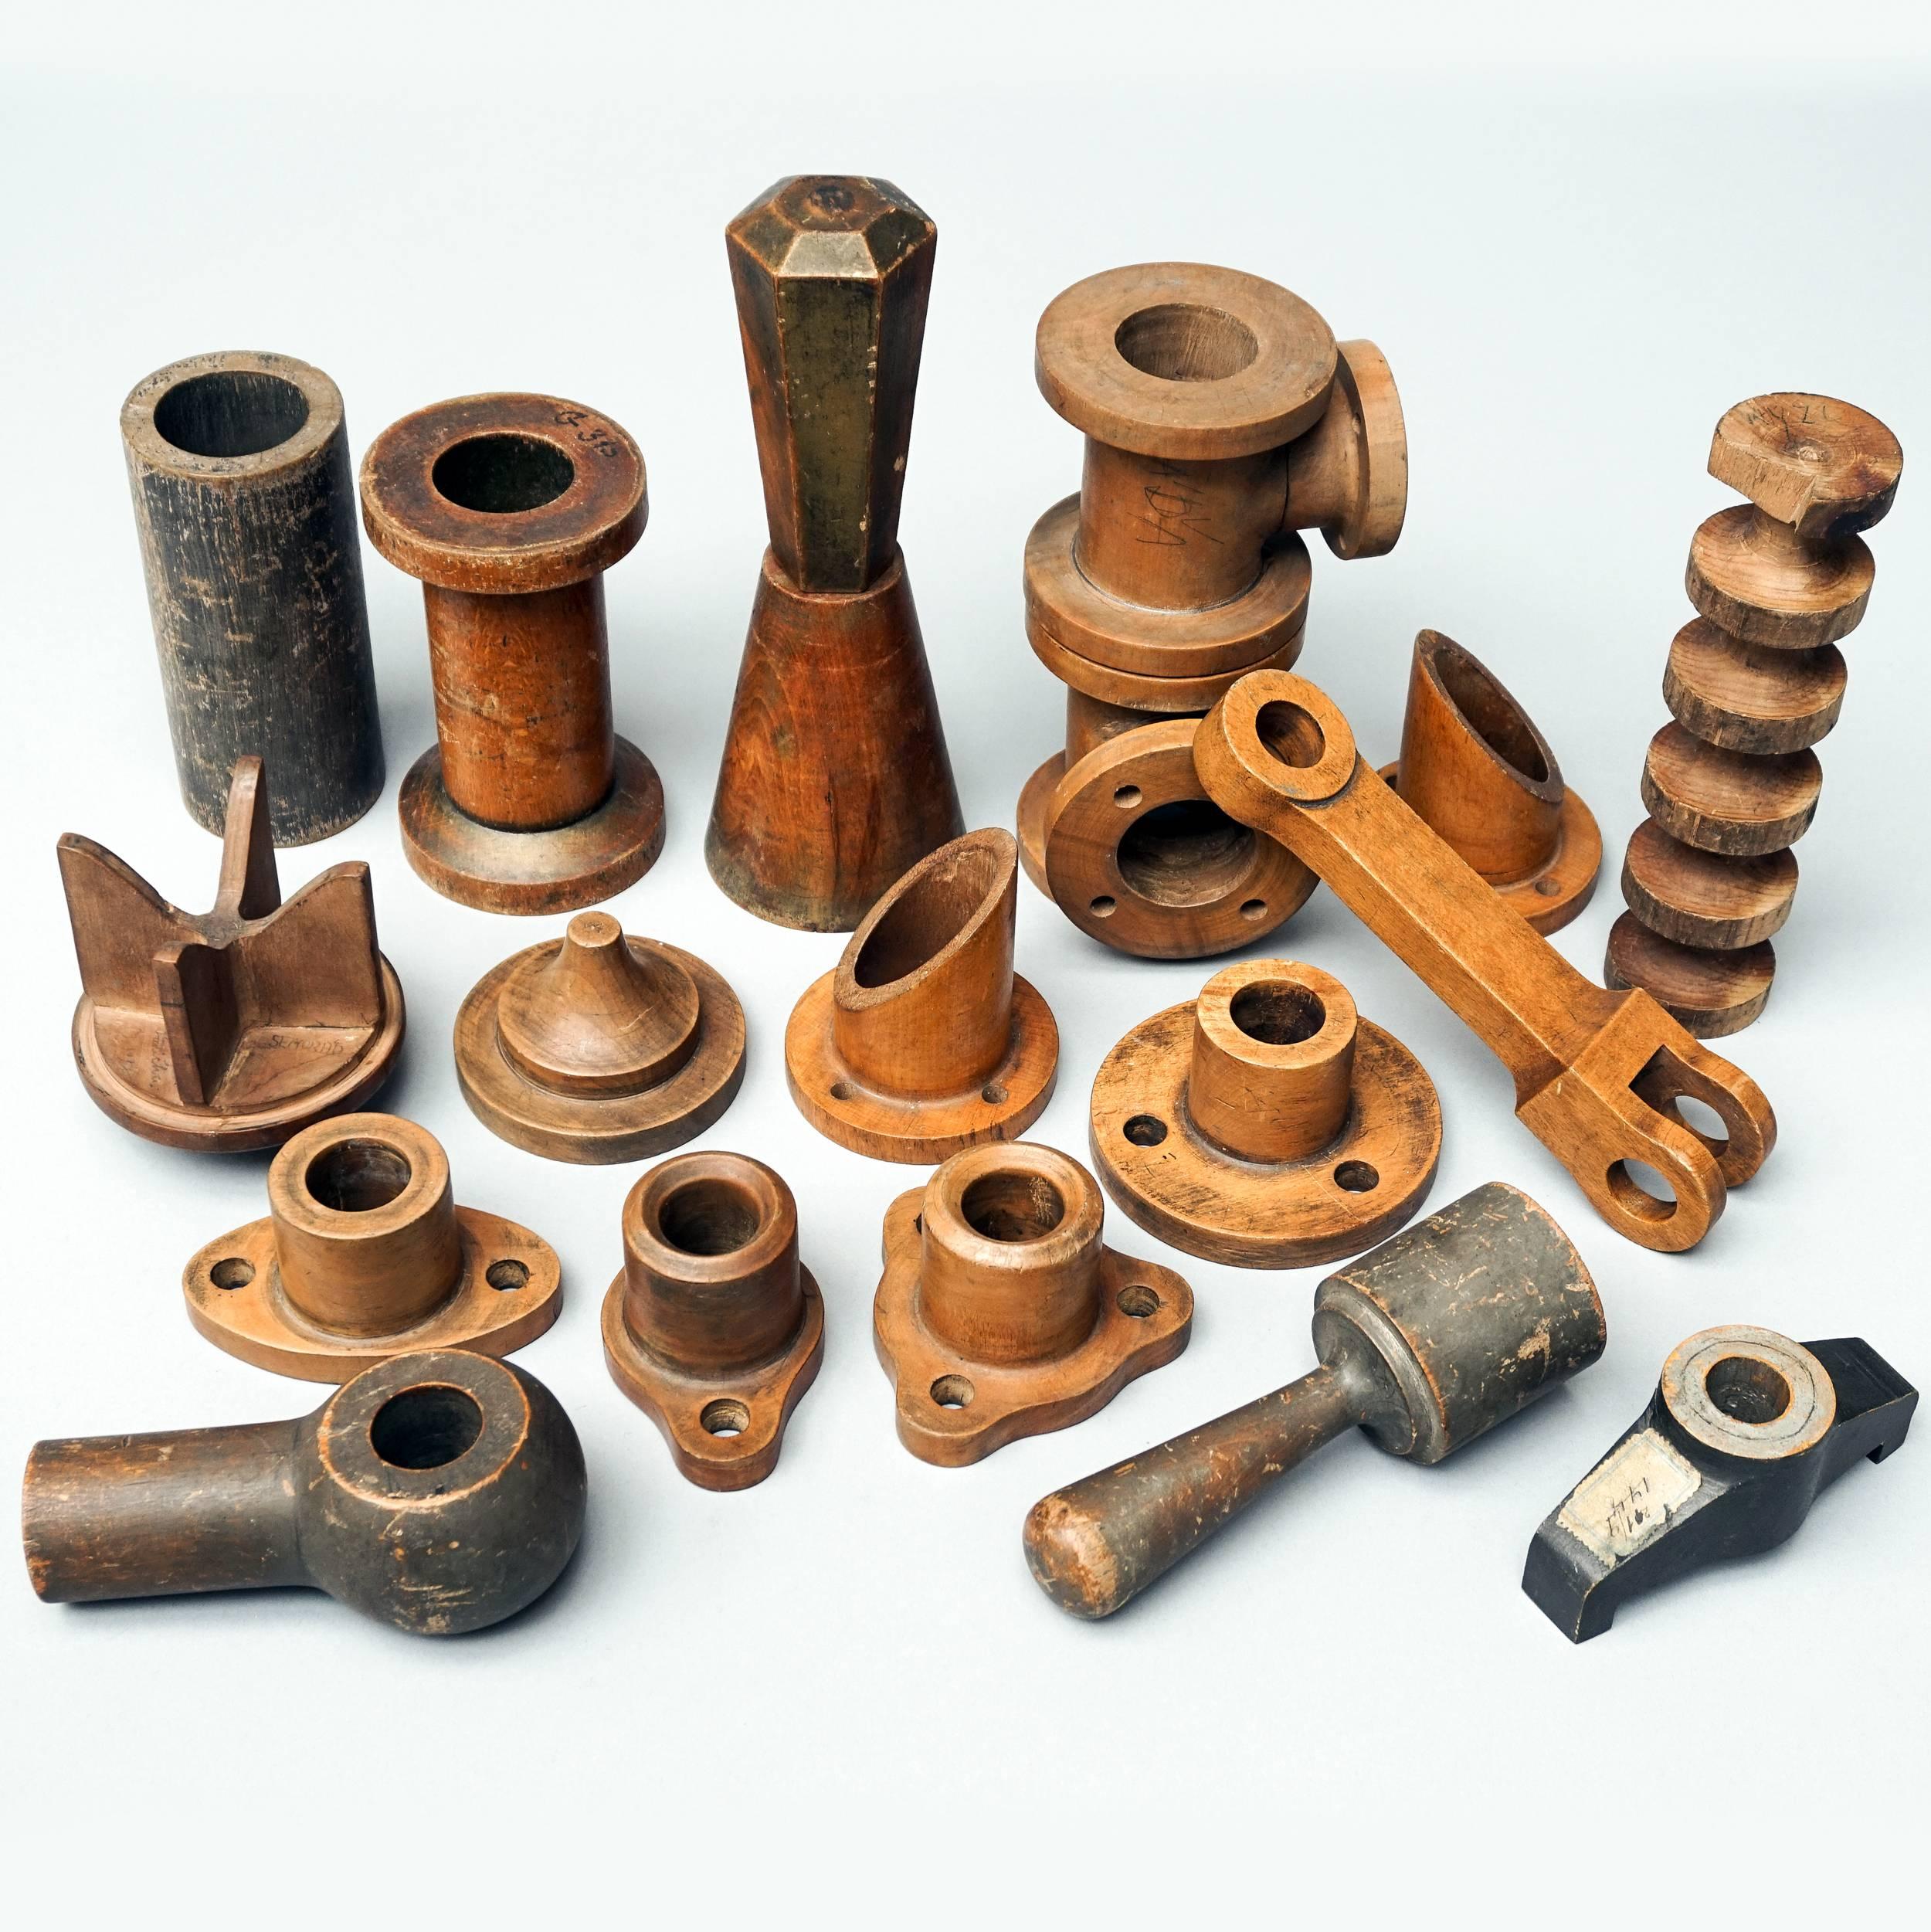 19th Century Industrial Wooden Foundry Molds or Moulds 2